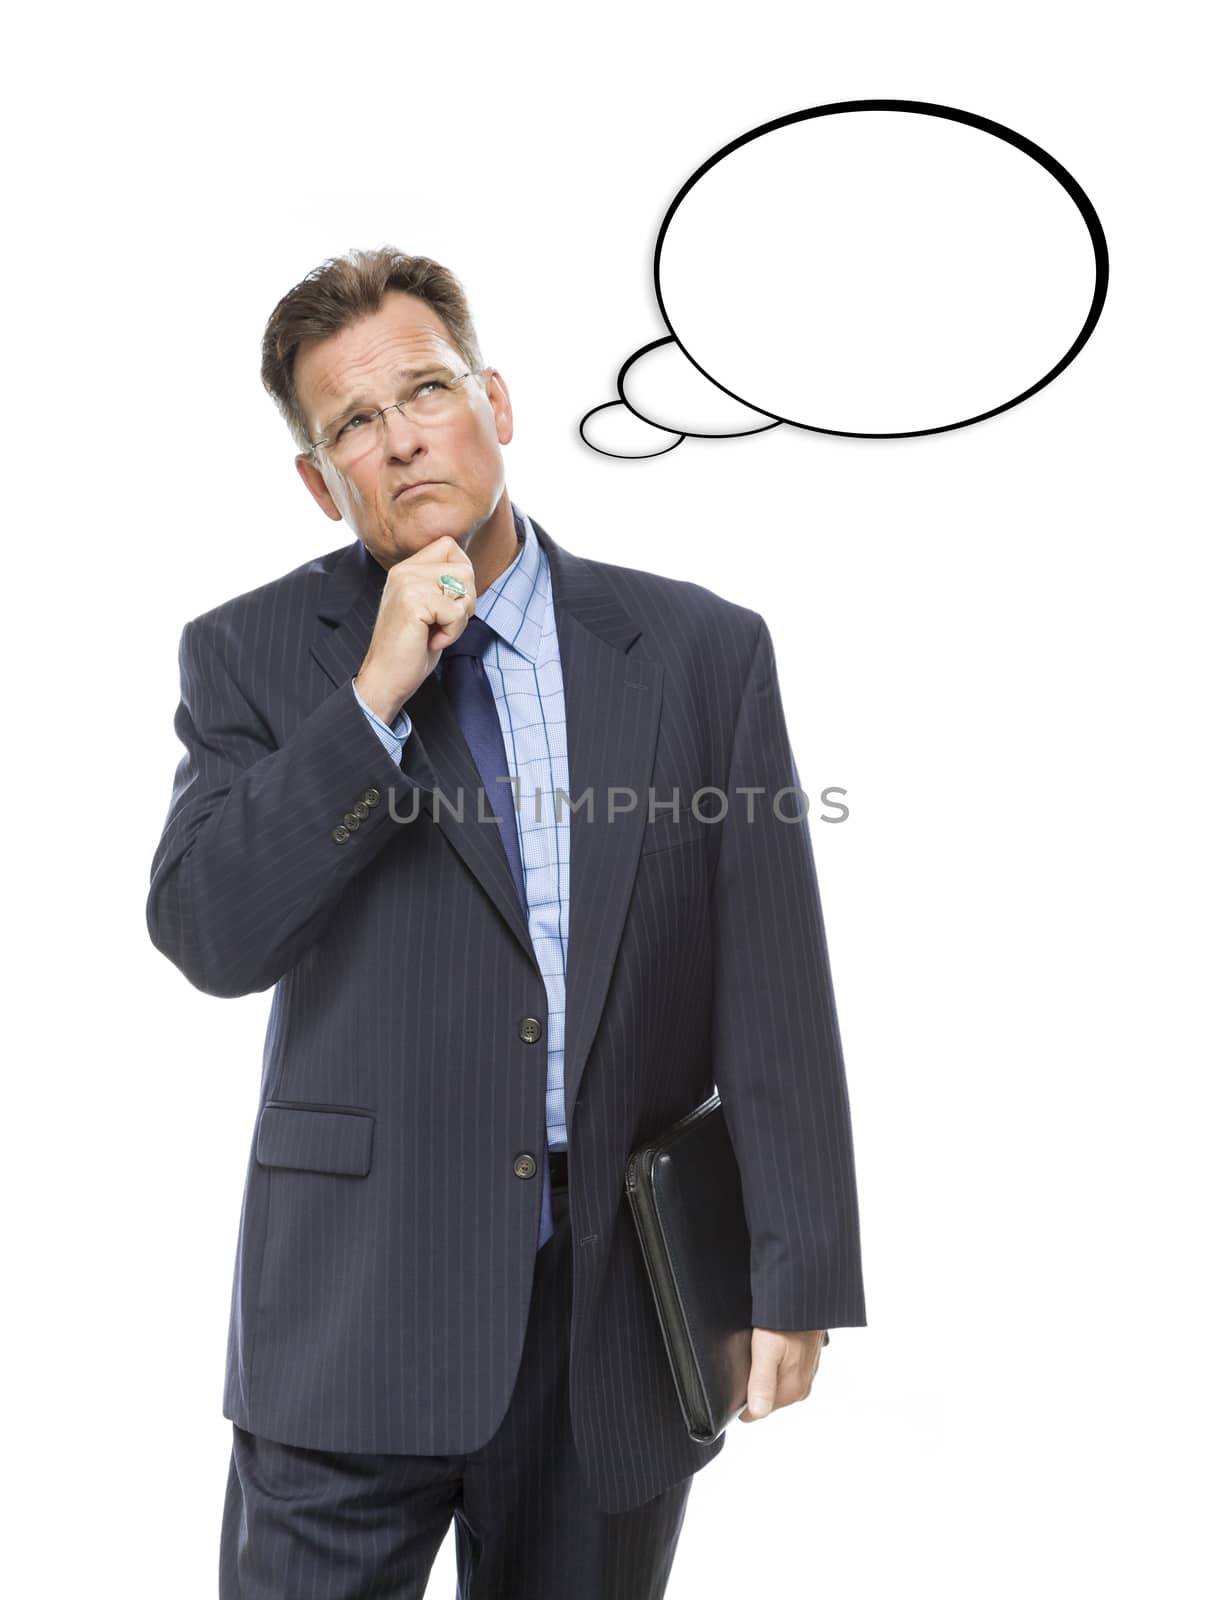 Handsome Pensive Businessman With Hand on Chin Looking Up At Blank Thought Bubble On White.